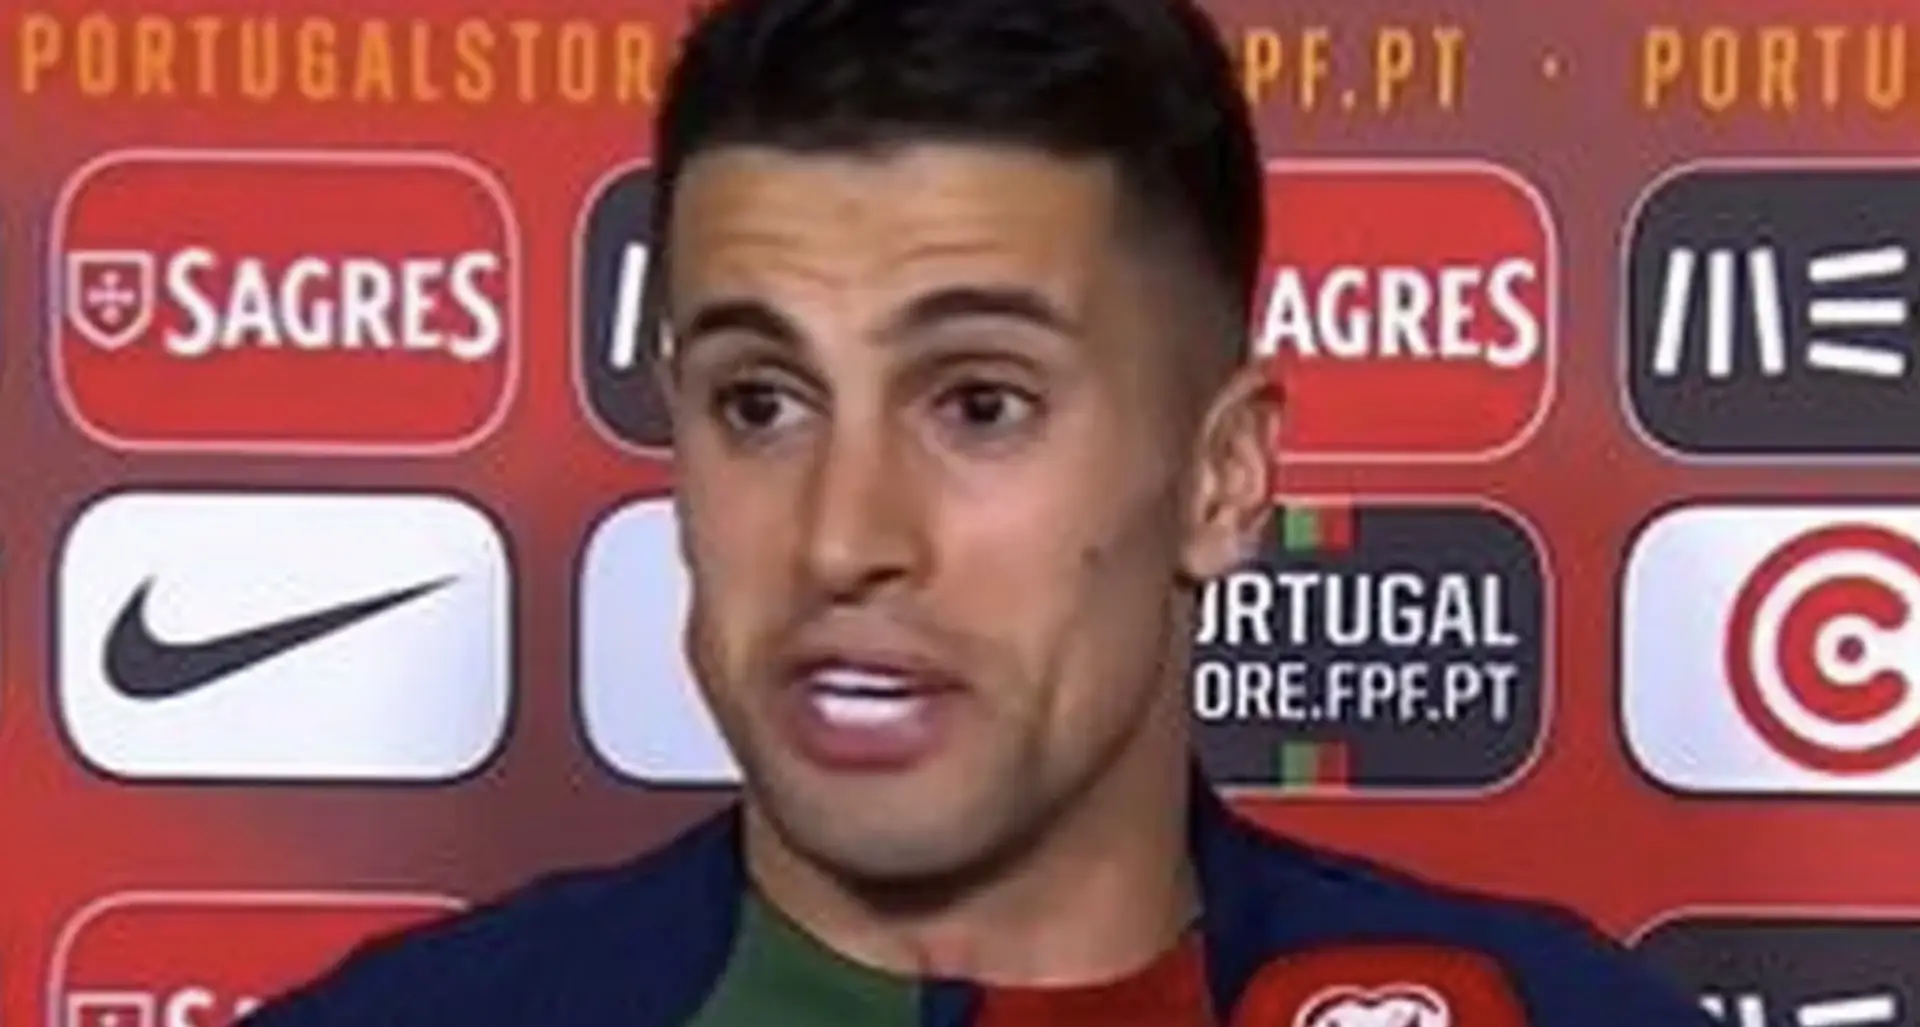 'Someone tries to sell a bad image of me': Cancelo sends message to critics after scoring for Portugal